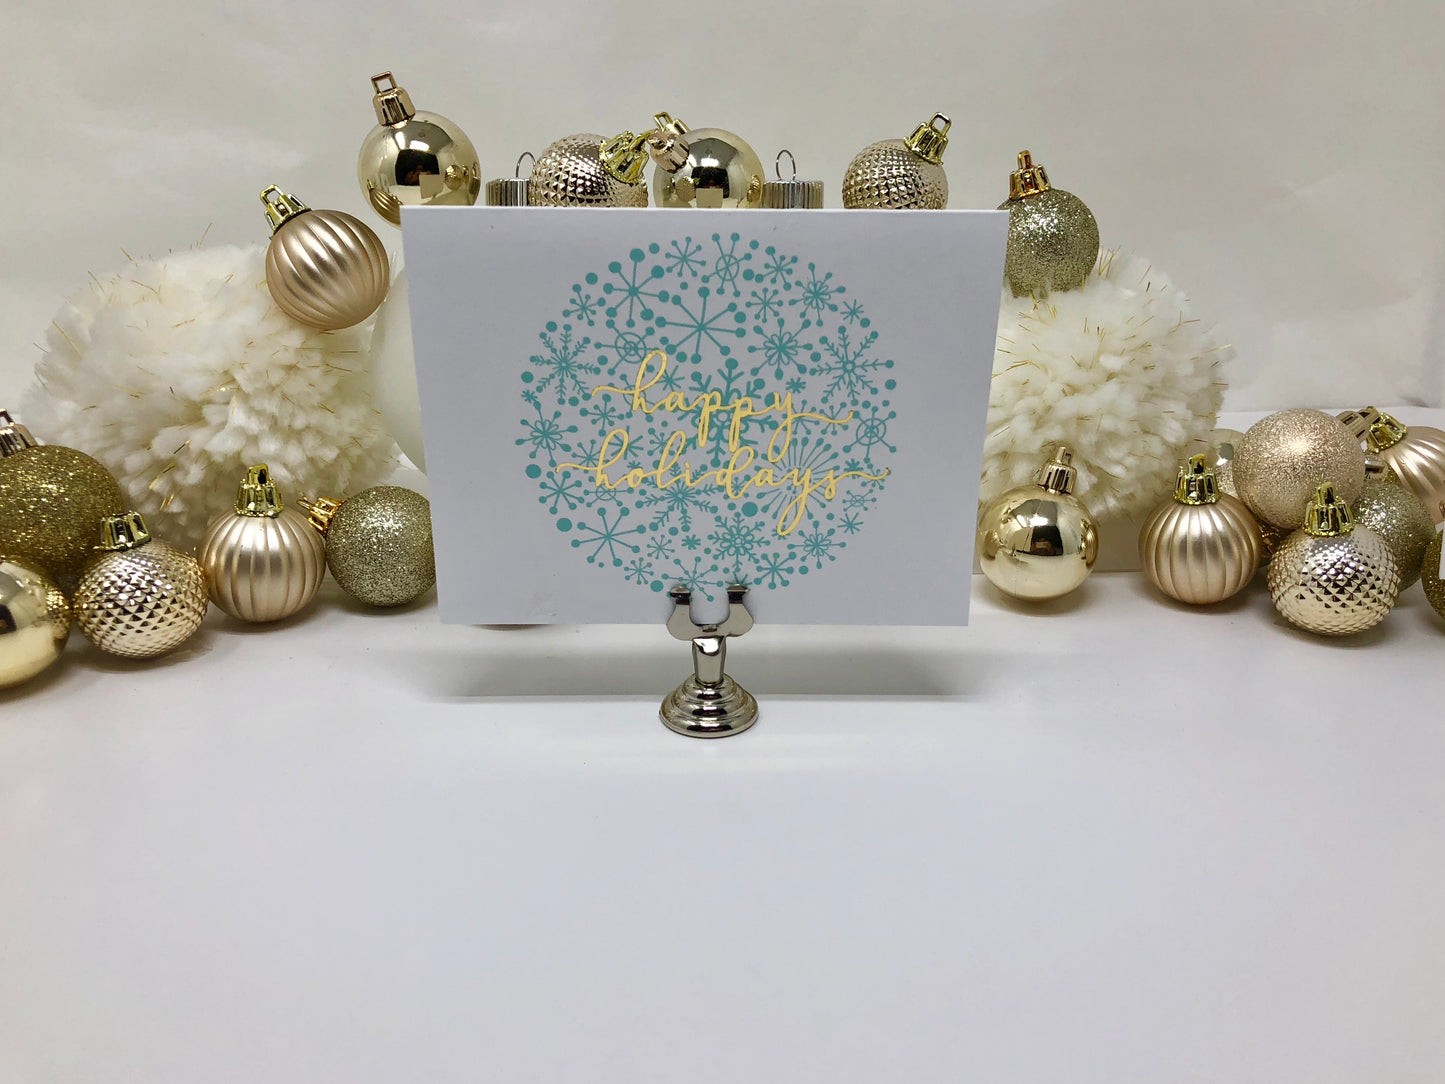 Gold Foil Happy Holidays Snowflake Calligraphy Cards - Roshae Designs